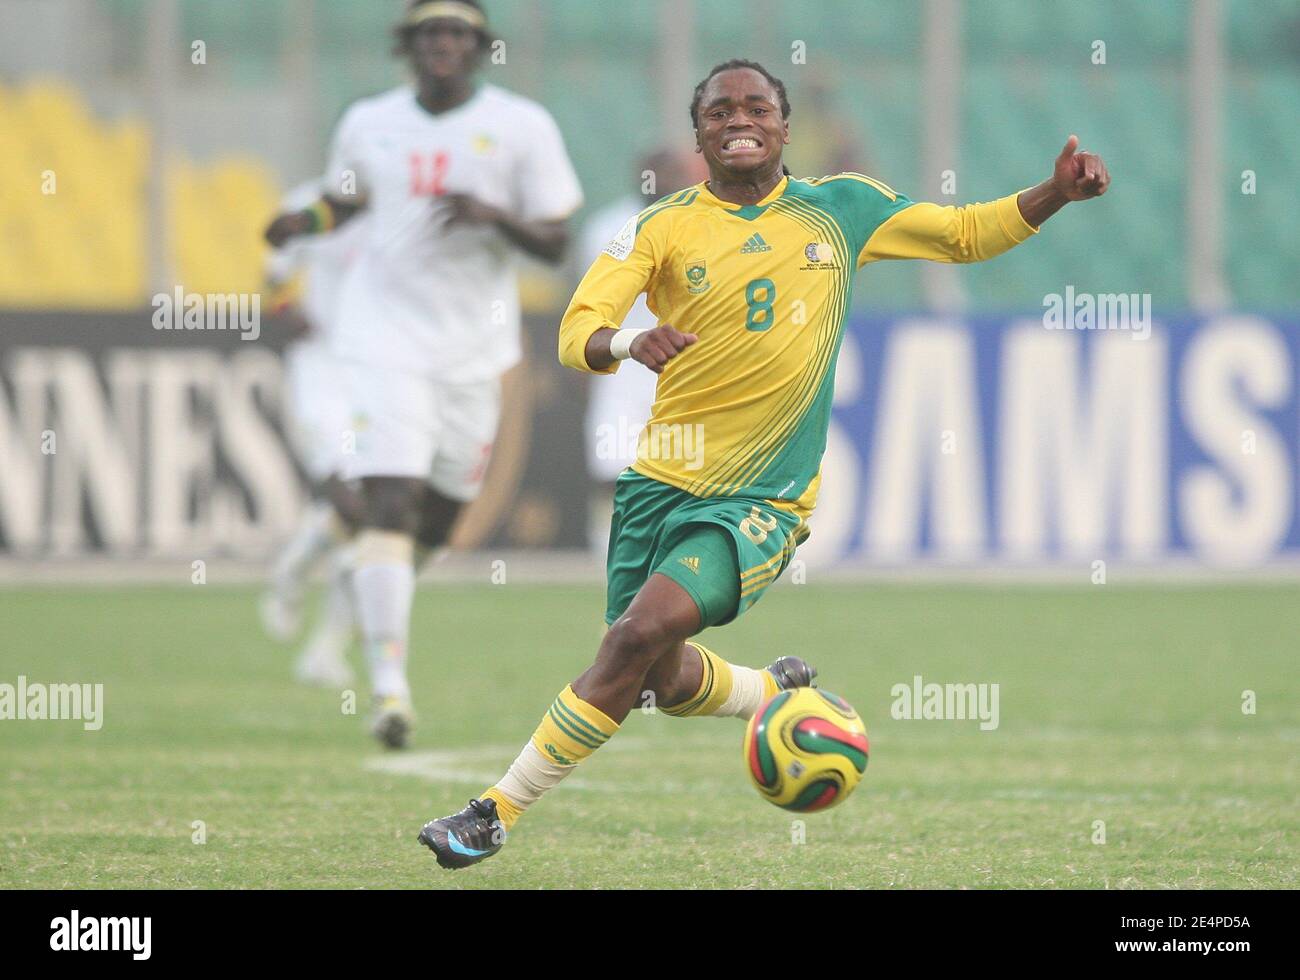 South Africa's Siphwe Tshabalala during the African Cup of Nations soccer match, Senegal vs South Africa in Kumasi, Ghana on January 31, 2008. The match ended in a 1-1 draw. Senegal failed to qualify for the next round of the competition. Photo by Steeve McMay/Cameleon/ABACAPRESS.COM Stock Photo